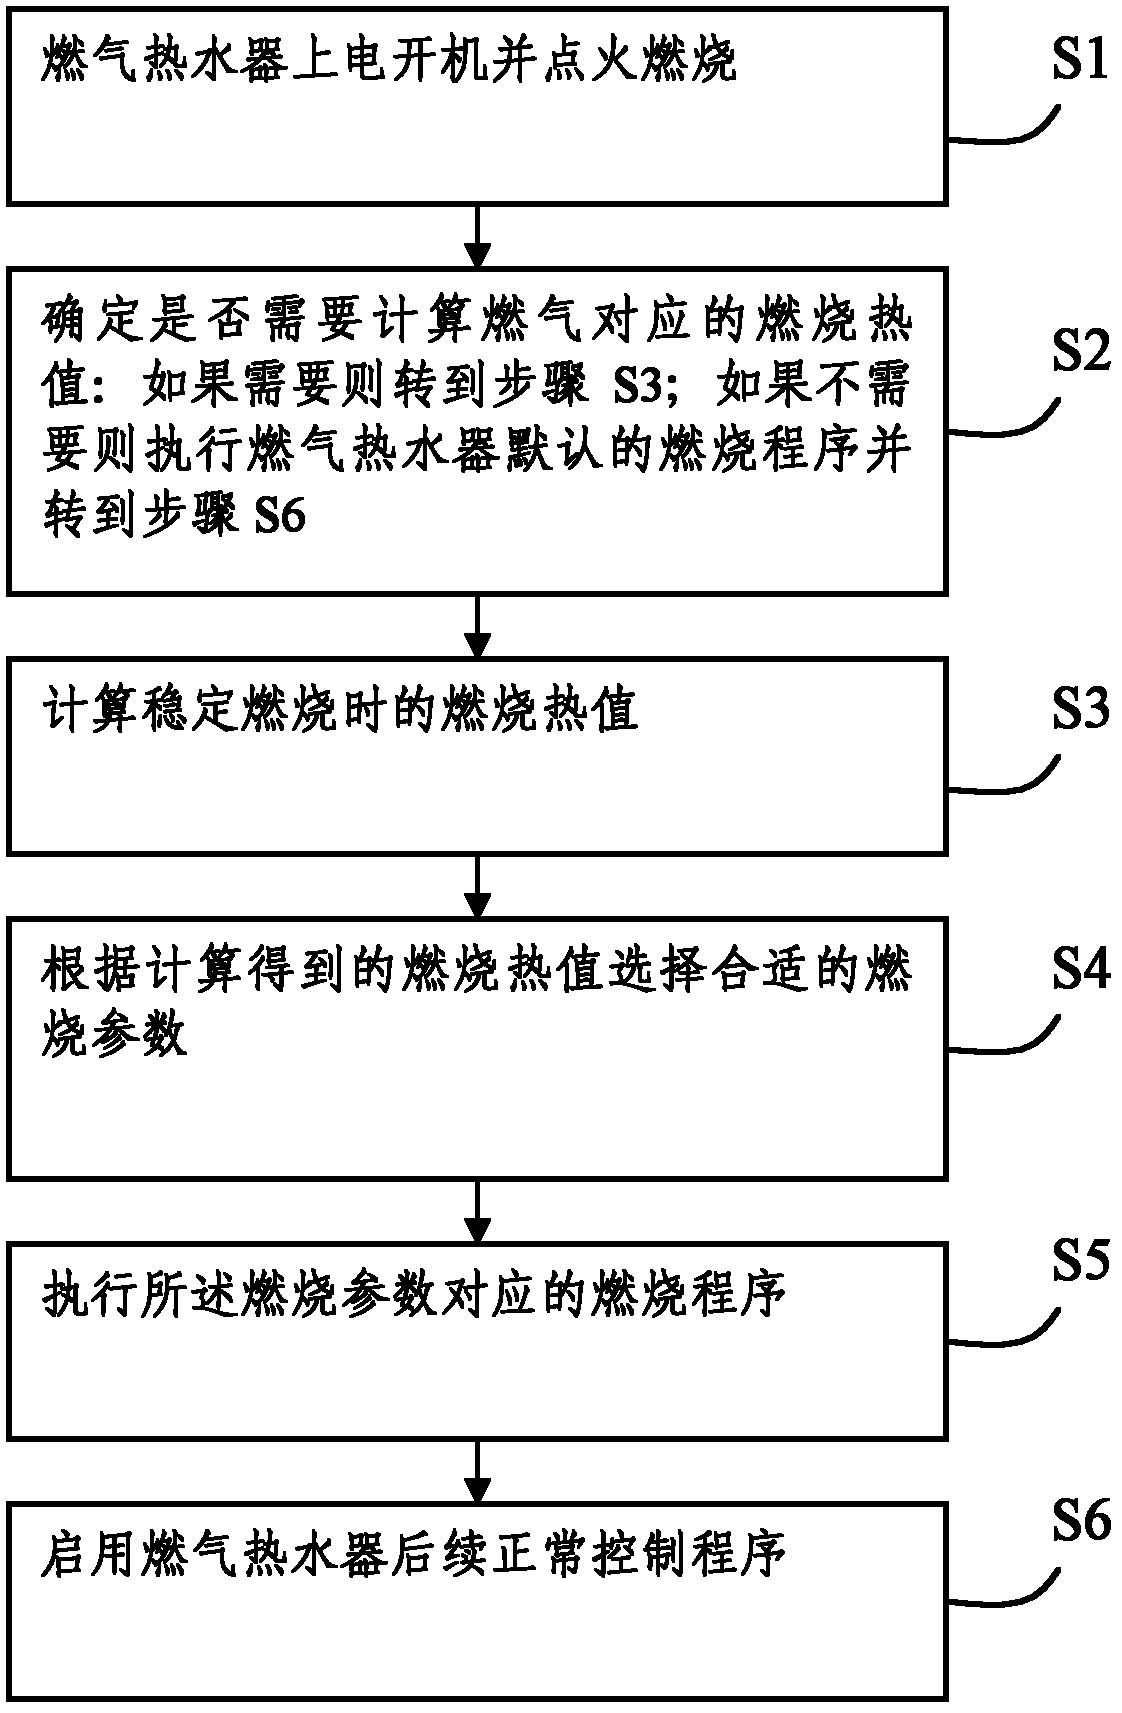 Fuel control method for fuel water heater